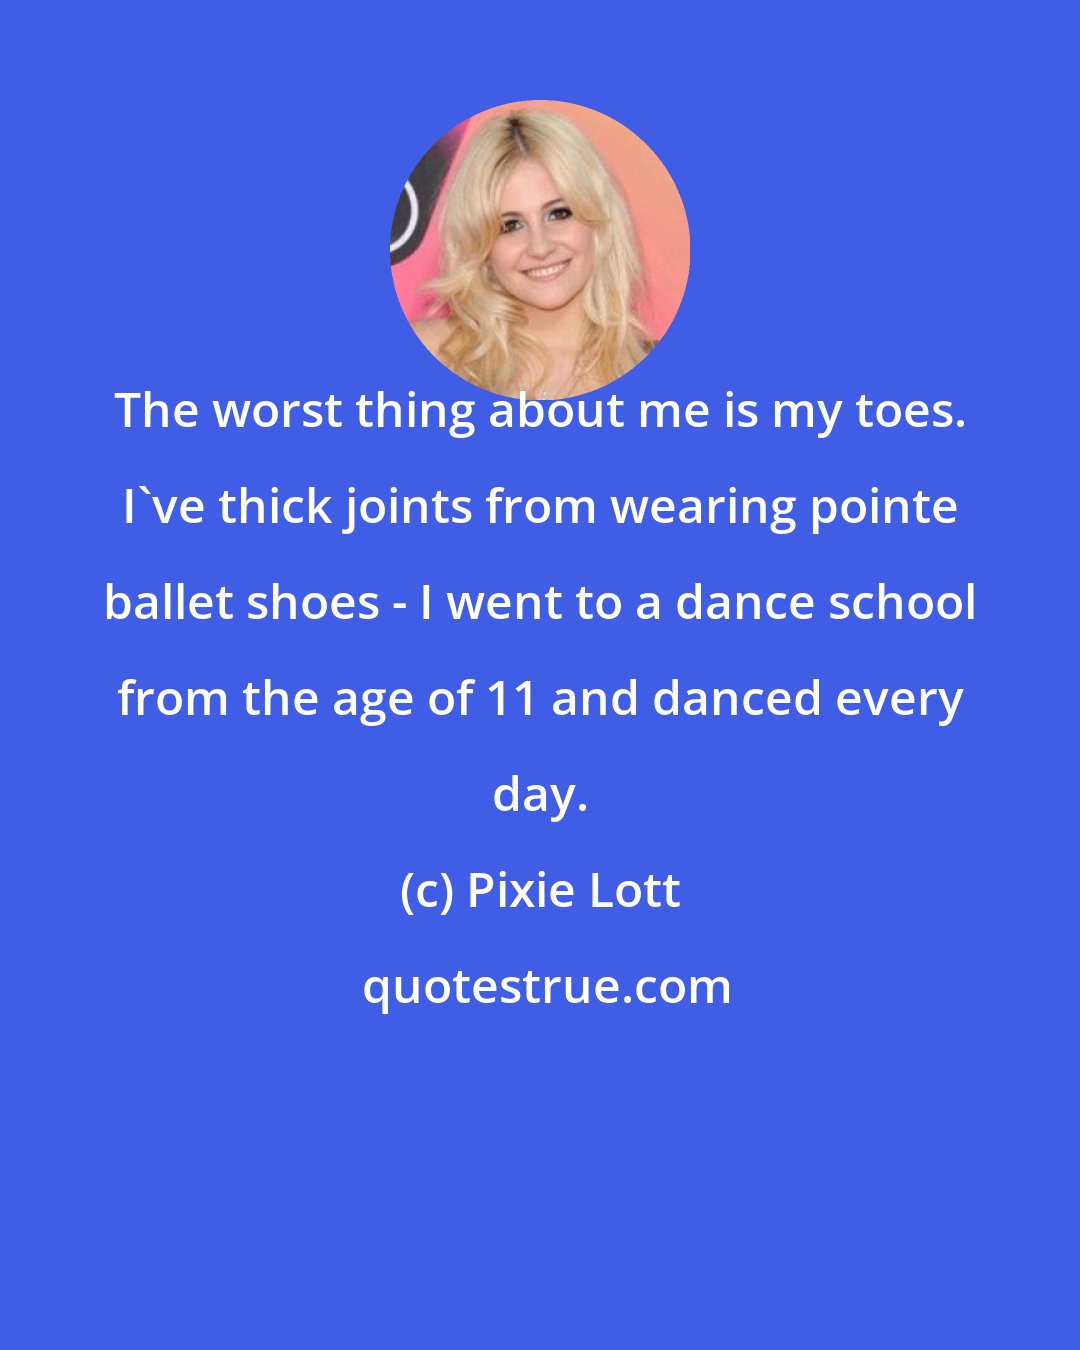 Pixie Lott: The worst thing about me is my toes. I've thick joints from wearing pointe ballet shoes - I went to a dance school from the age of 11 and danced every day.